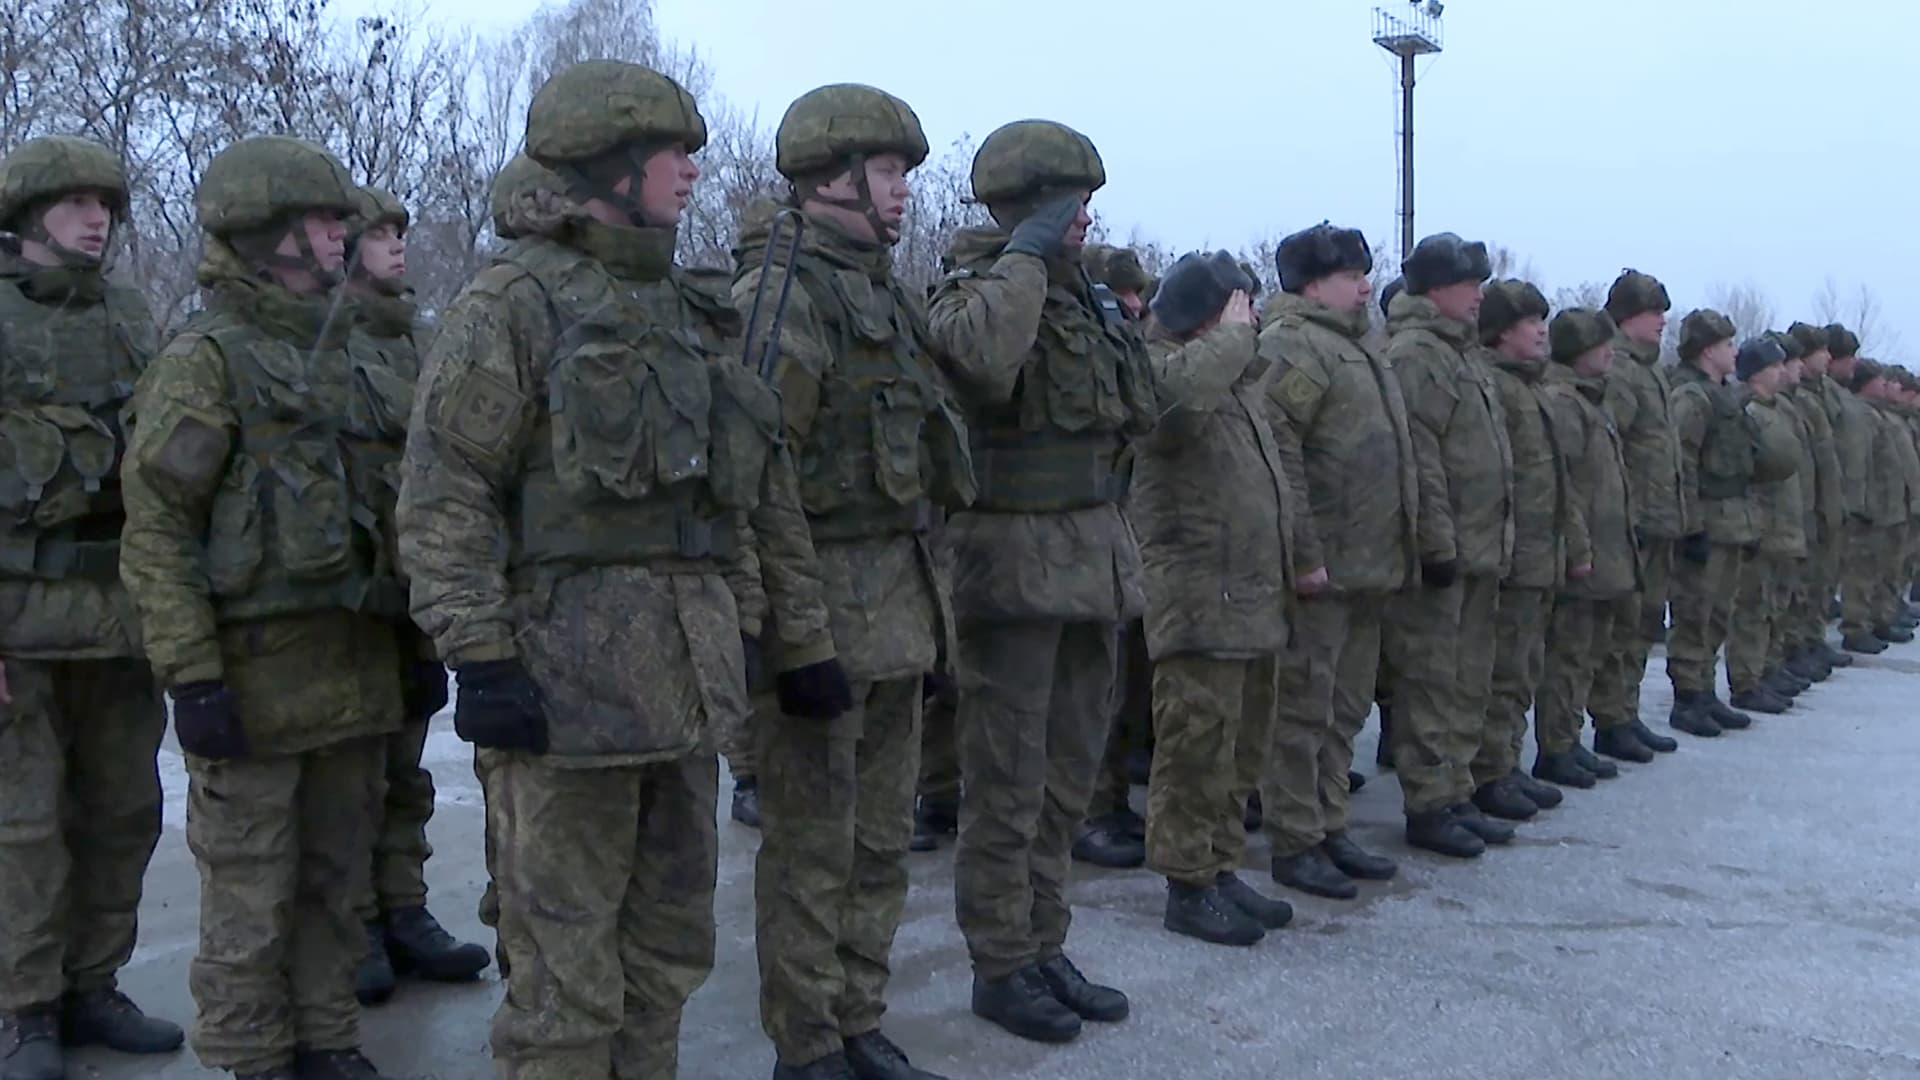 Servicemen of Russia's Eastern Military District units line up for a welcoming ceremony as they arrive at unfamiliar training ranges in Belarus combining their own means of transport with travelling by train, to take part in a joint military exercise held by the Union State of Russia and Belarus and aiming to simulate repelling an external attack on its border, cutting possible supply lines for invaders as well as detecting, containing and eliminating their combat and subversive units.